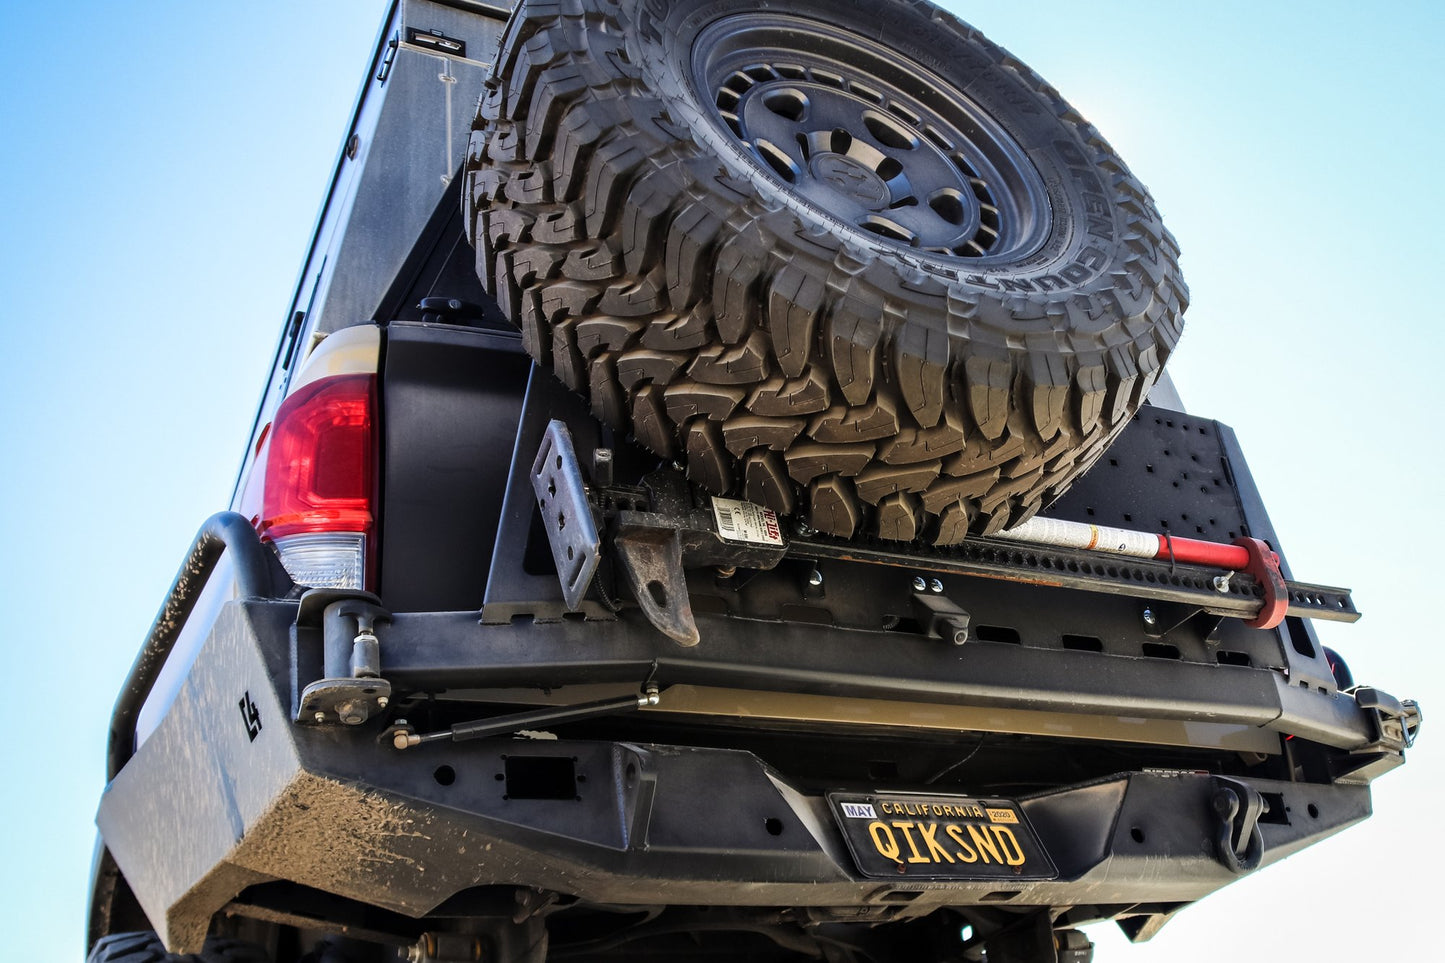 C4 Fabrication Tacoma Overland Series High Clearance  Rear Bumper / 3rd Gen / 2016+